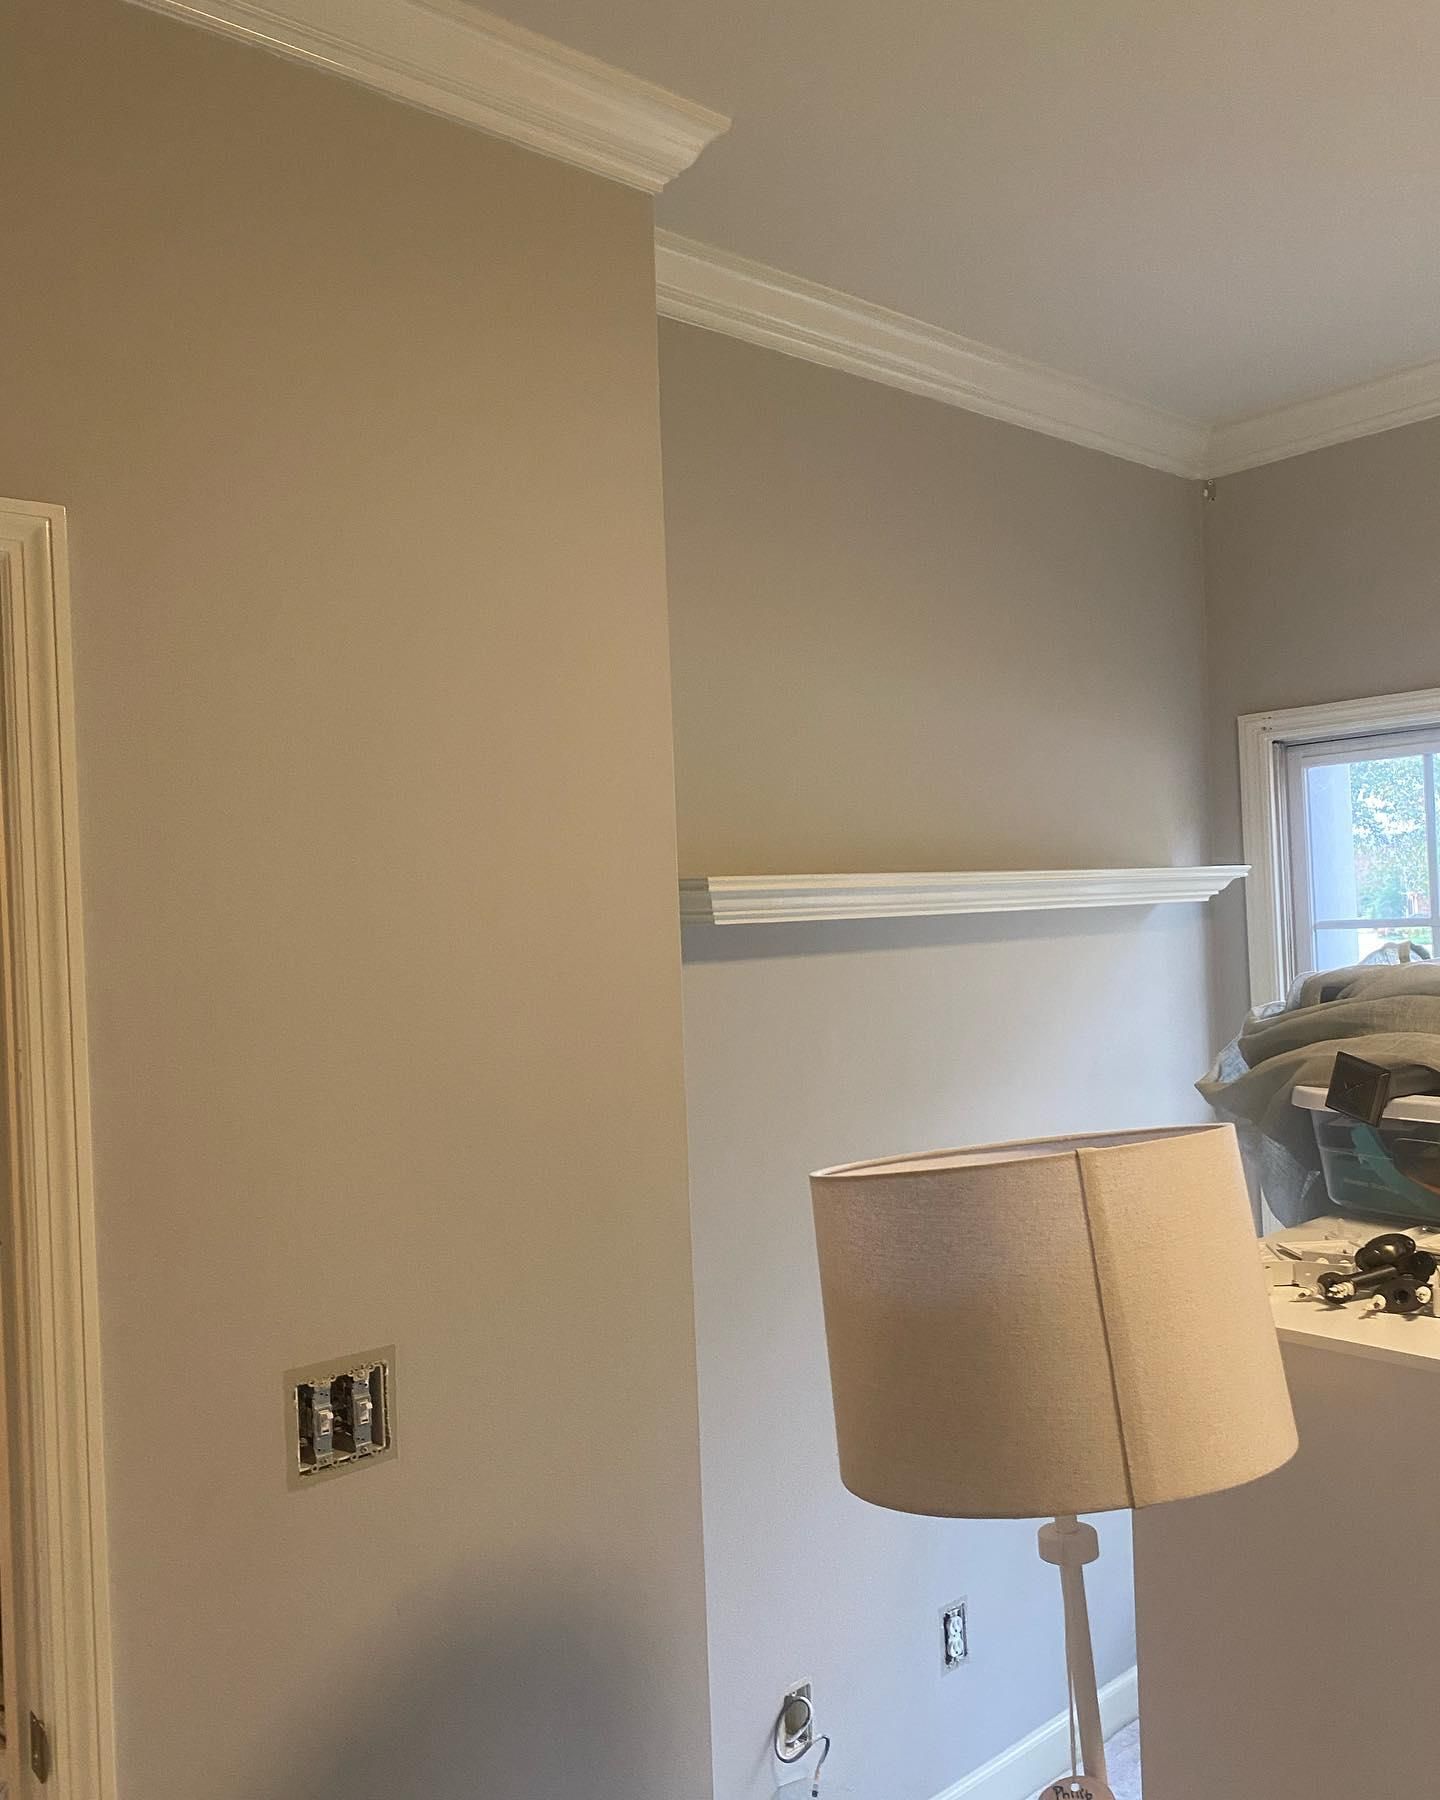  for Luxury Professional Painting in Huntsville, AL